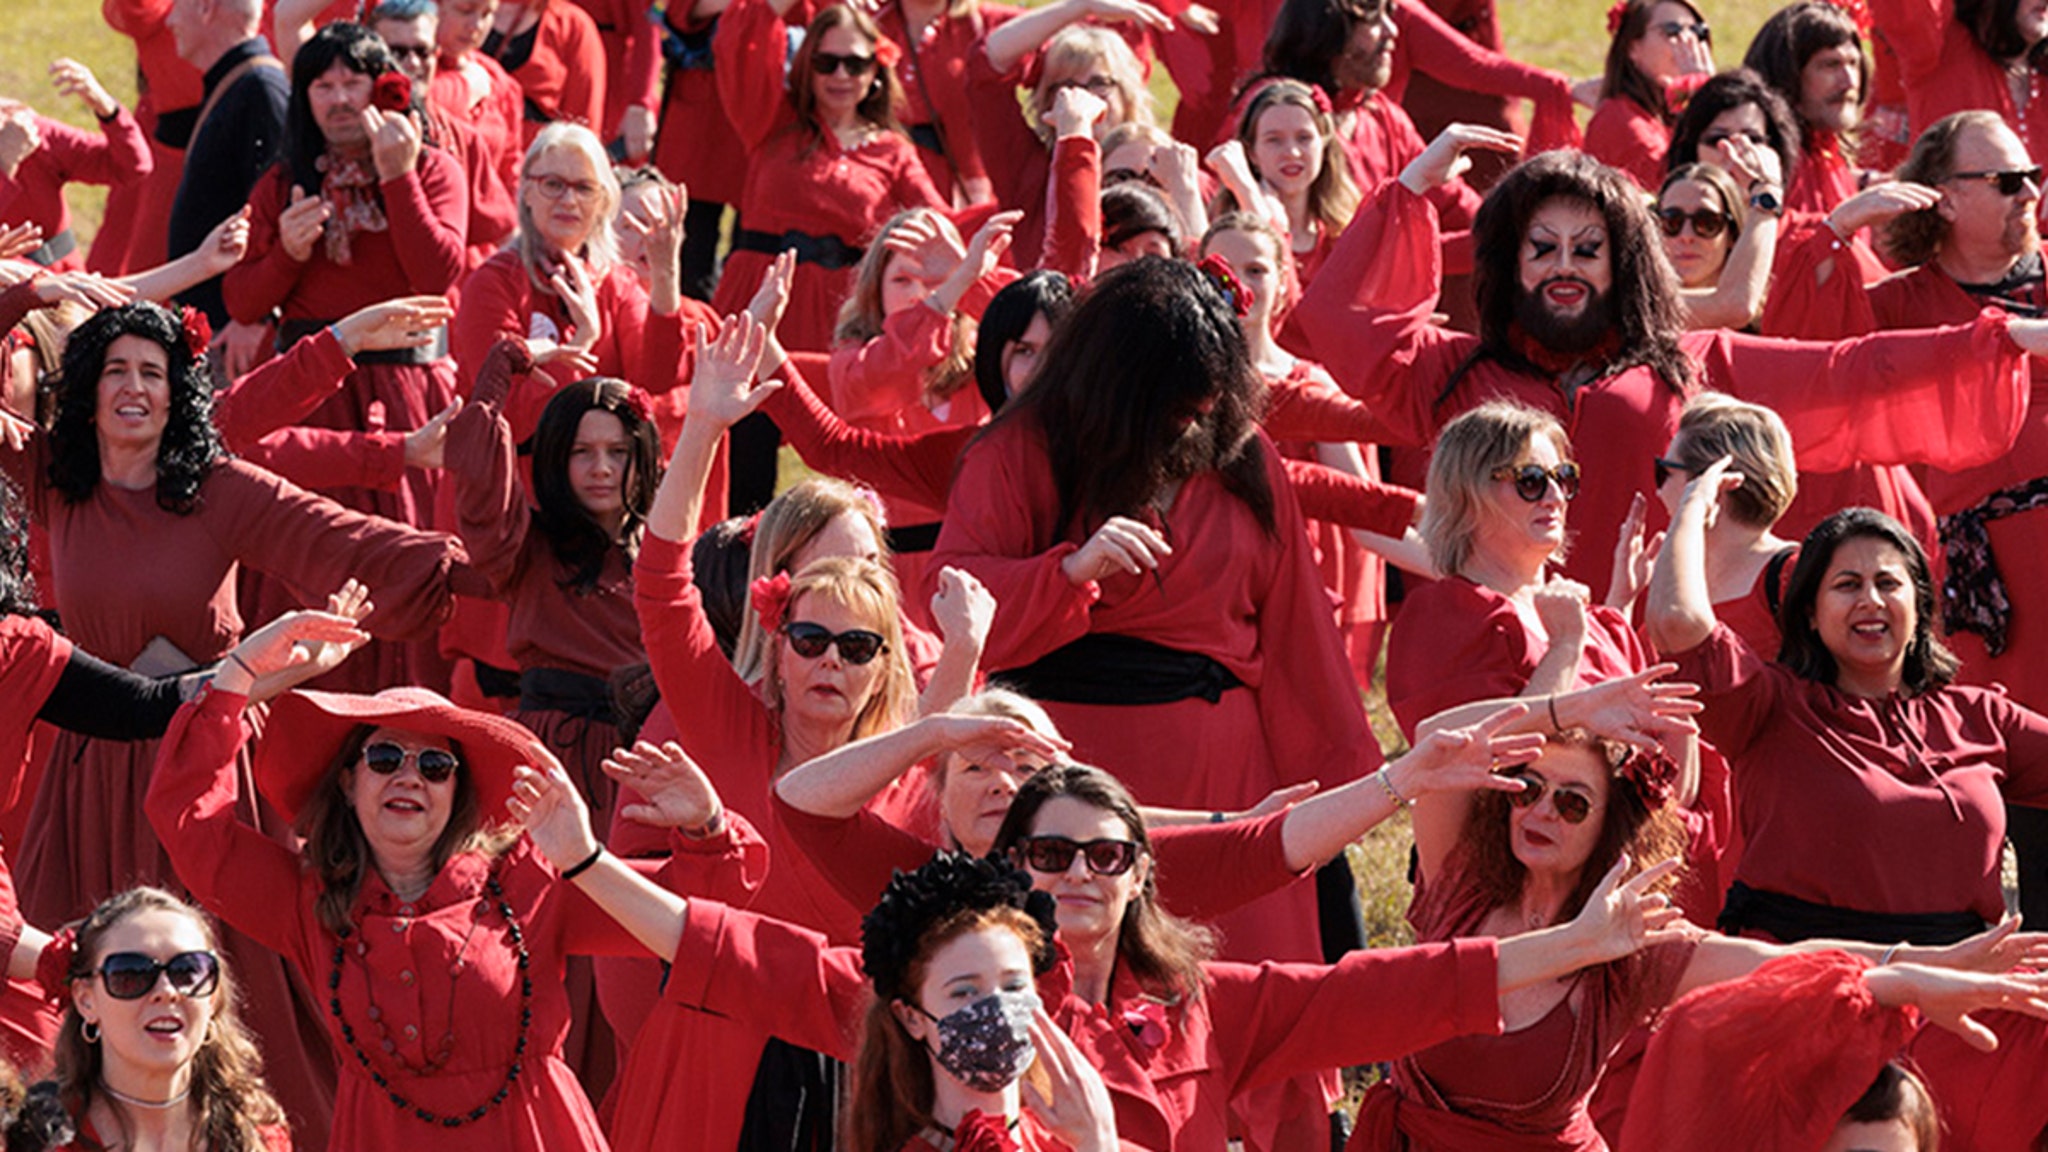 Kate Bush fans gather en masse for Wuthering Heights Day, Dance in Red